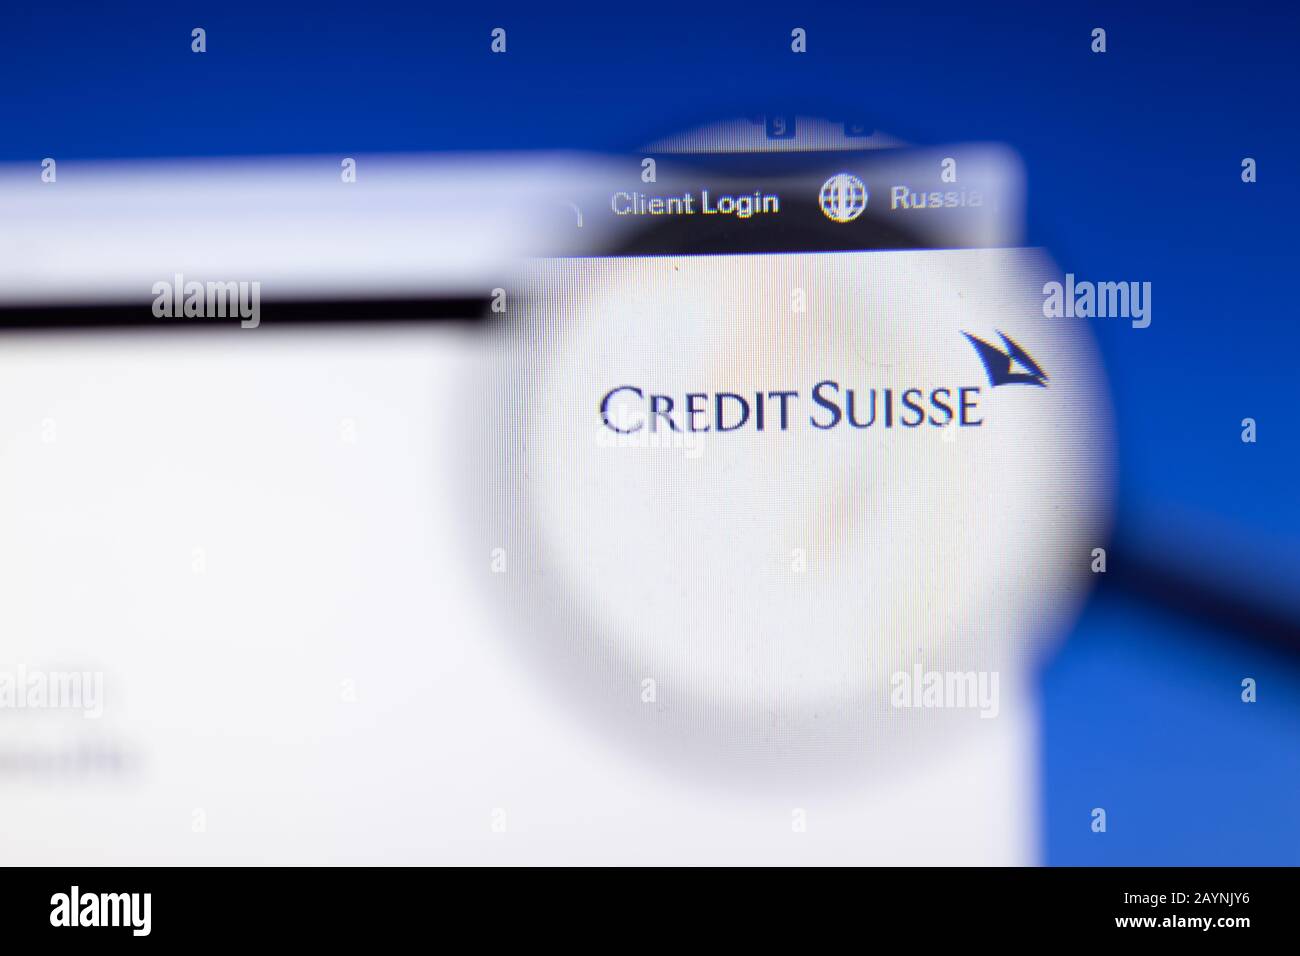 Saint-Petersburg, Russia - 18 February 2020: Credit Suisse company website page logo on laptop display. Screen with icon, Illustrative Editorial Stock Photo